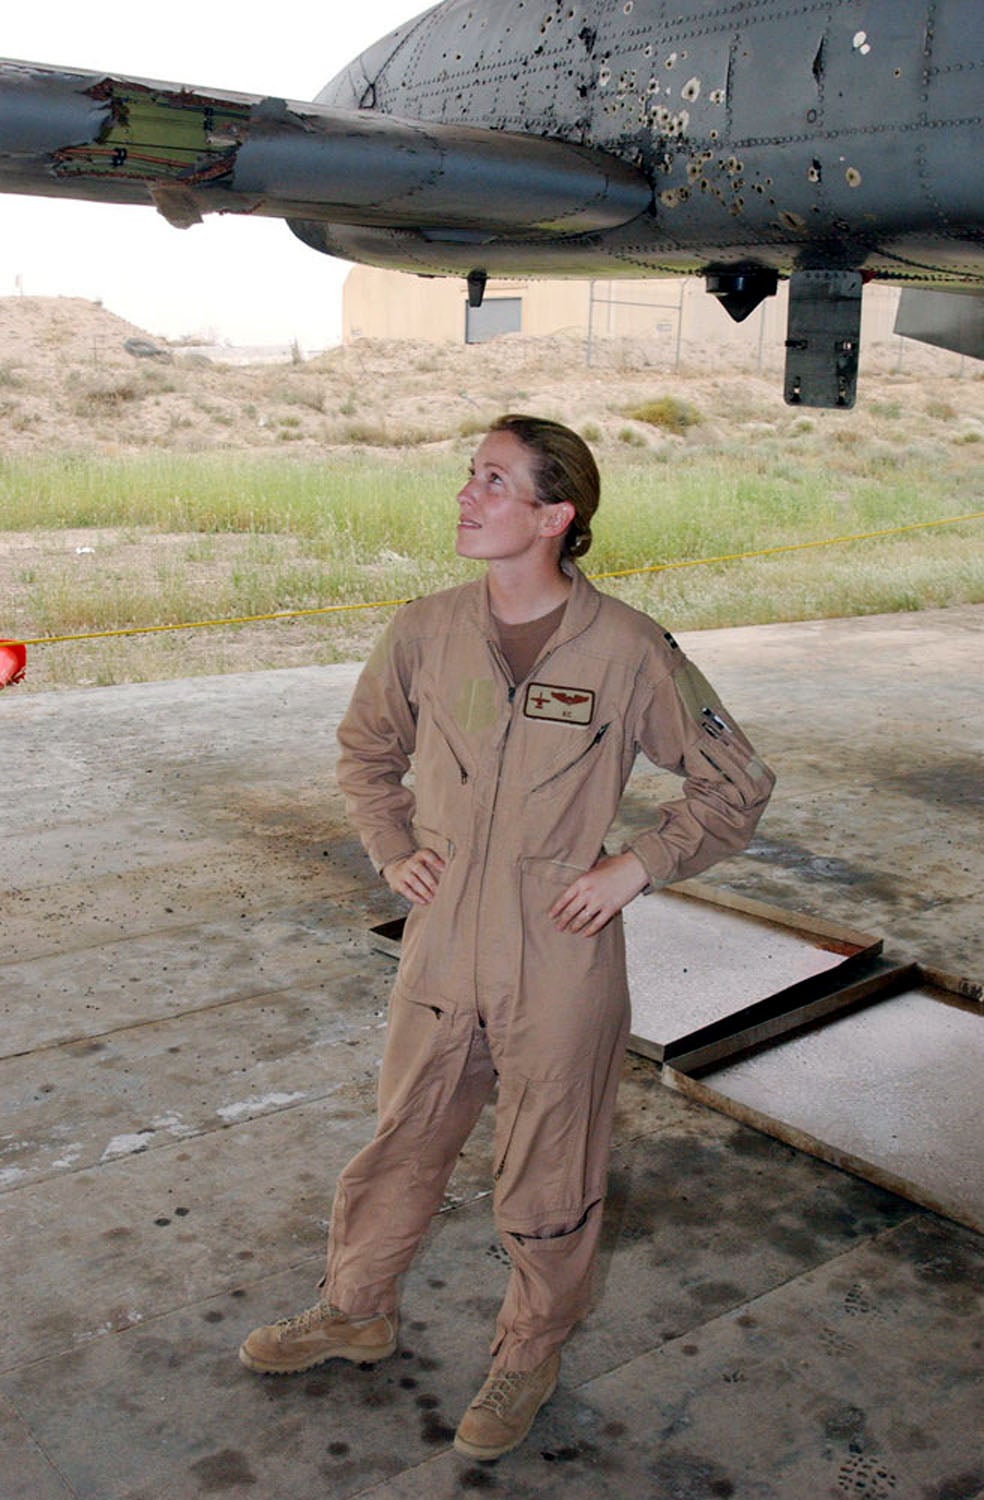 Then Capt. Kim Campbell, an A-10 Thunderbolt II pilot deployed with the 332nd Air Expeditionary Wing, surveys the battle damage to her airplane. Captain Kim's A-10 was hit over Baghdad during a close air support mission on April 7.  (Courtesy photo)